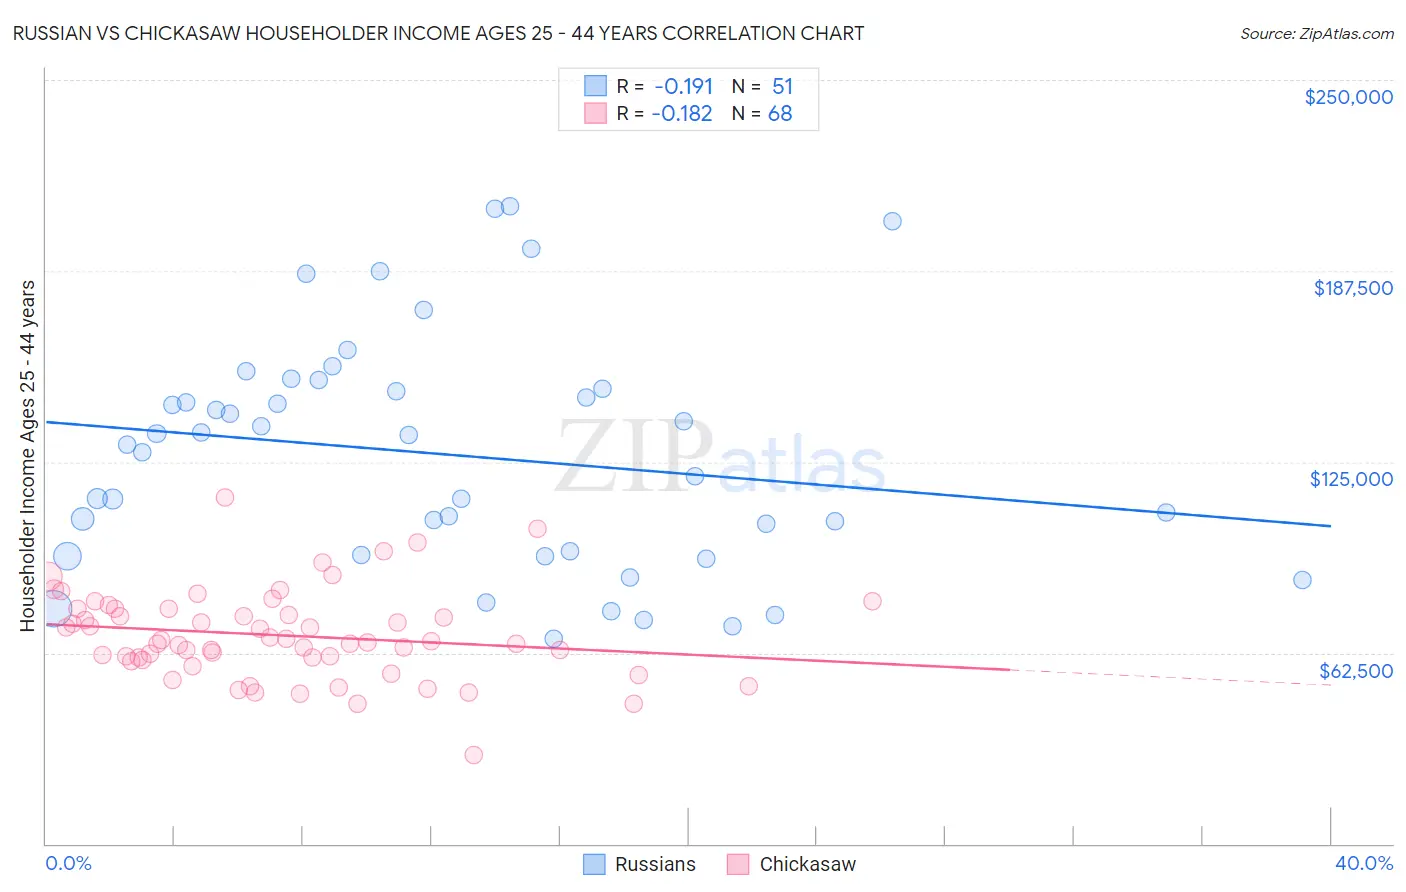 Russian vs Chickasaw Householder Income Ages 25 - 44 years